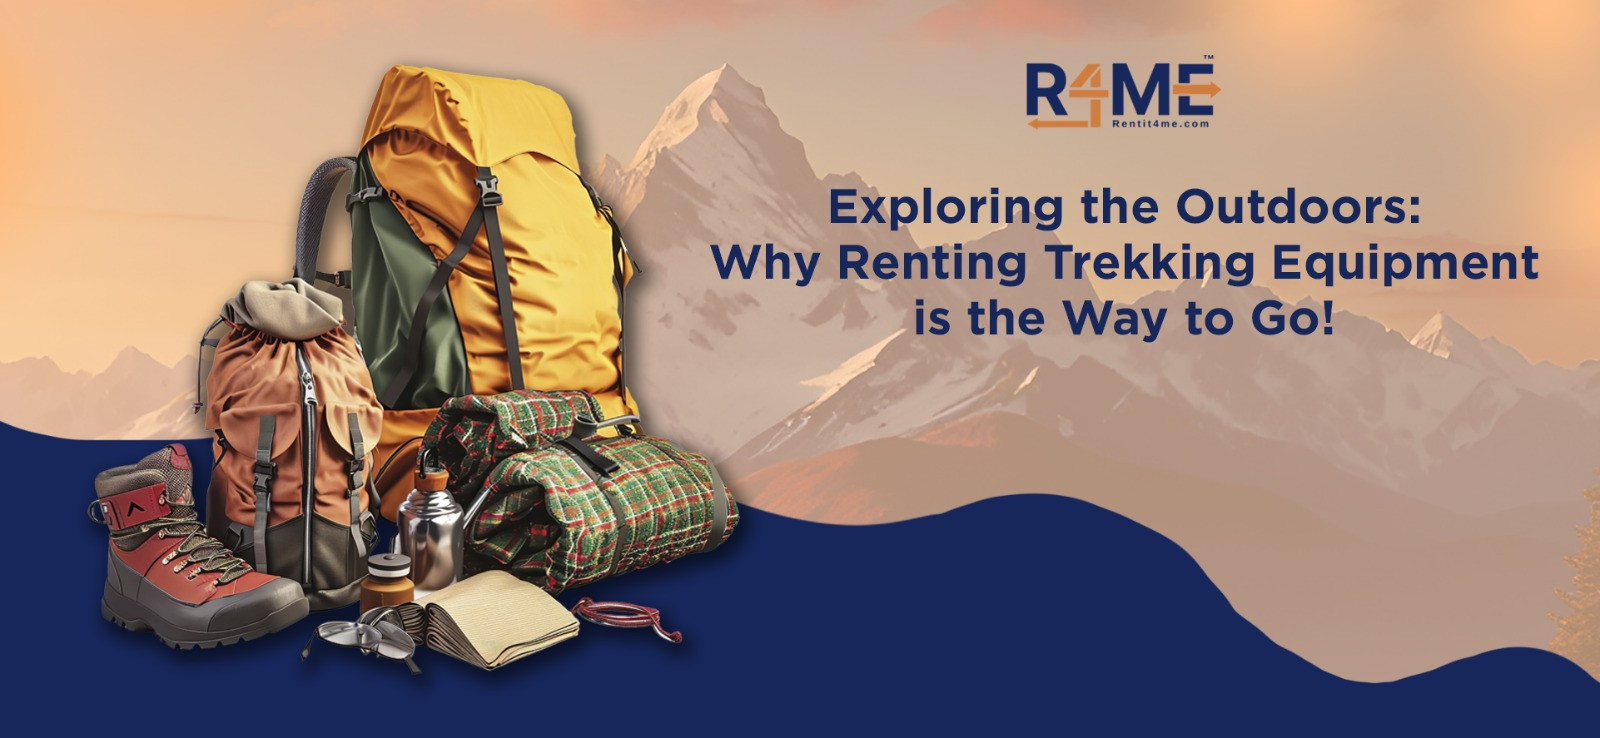 Exploring the Outdoors: Why Renting Trekking Equipment is the Way to Go?